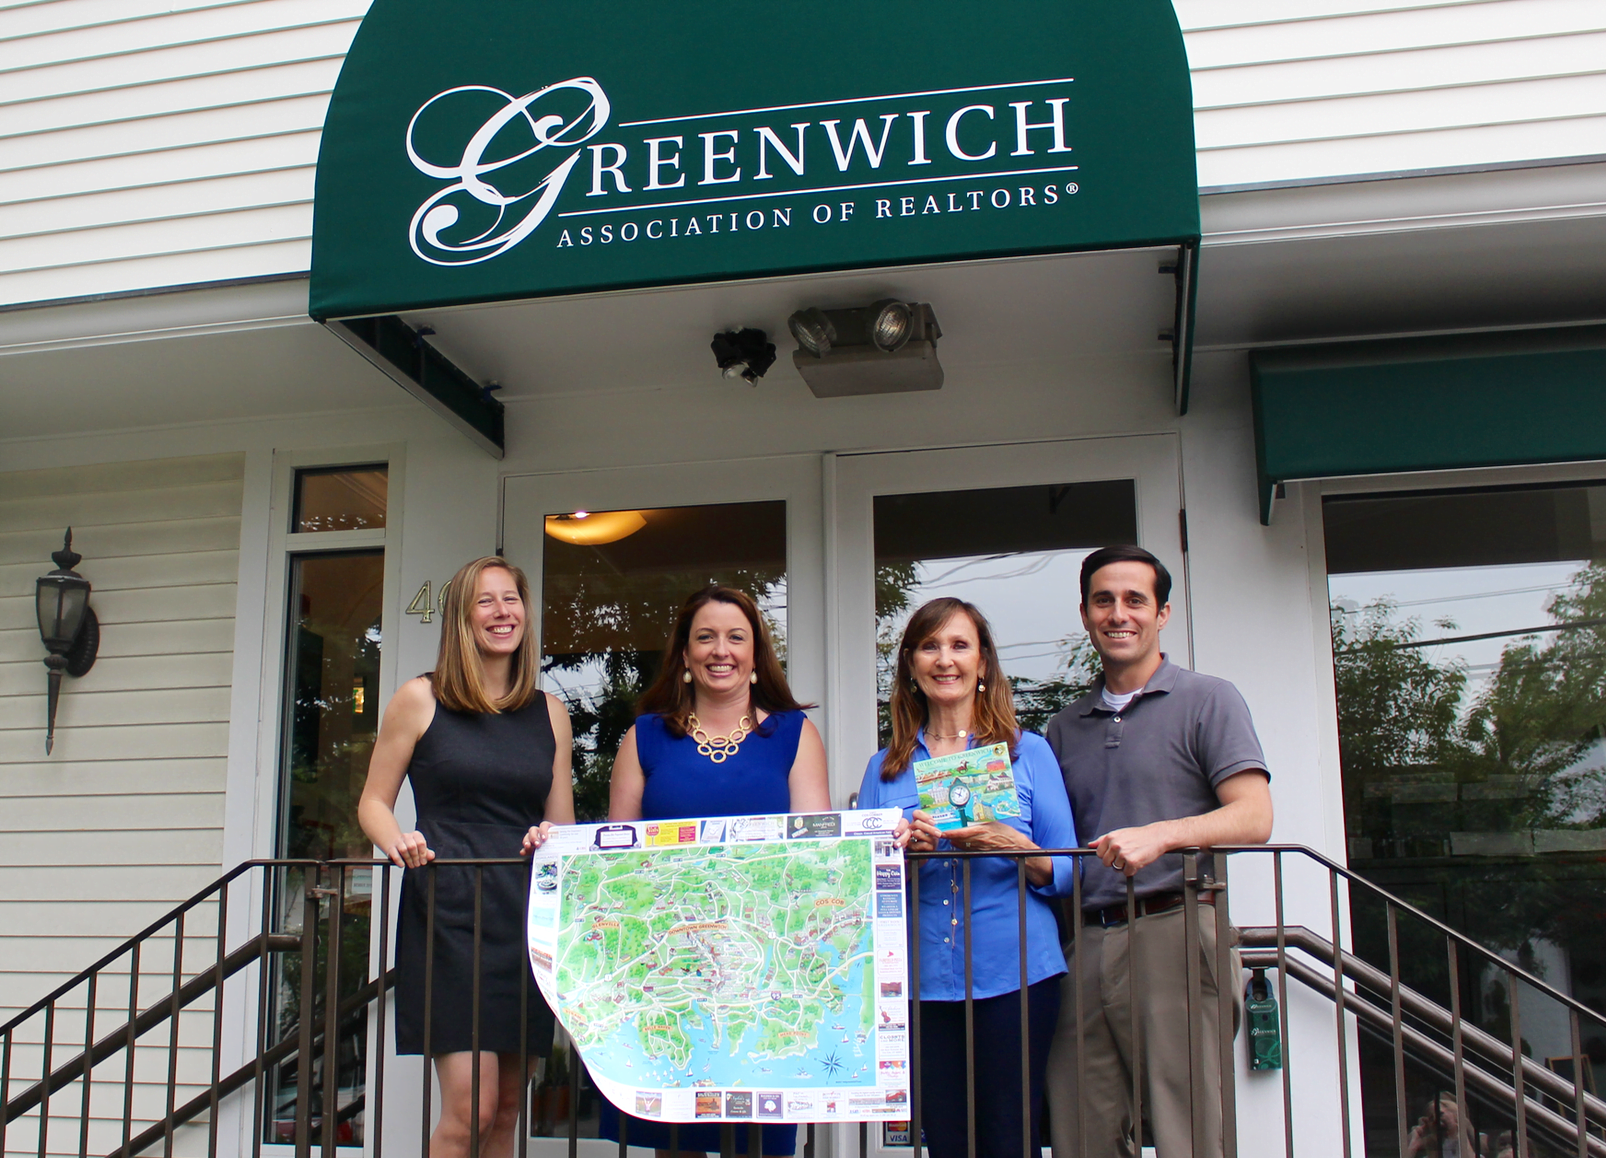 Outside the Greenwich Association of Realtors, Jessica Reid and Craig Jones of Greenwich Point Marketing who collaborated with Liz Norfleet of Norfleet Marketing on a new two-sided illustrated color map of Greenwich. Photo: Leslie Yager